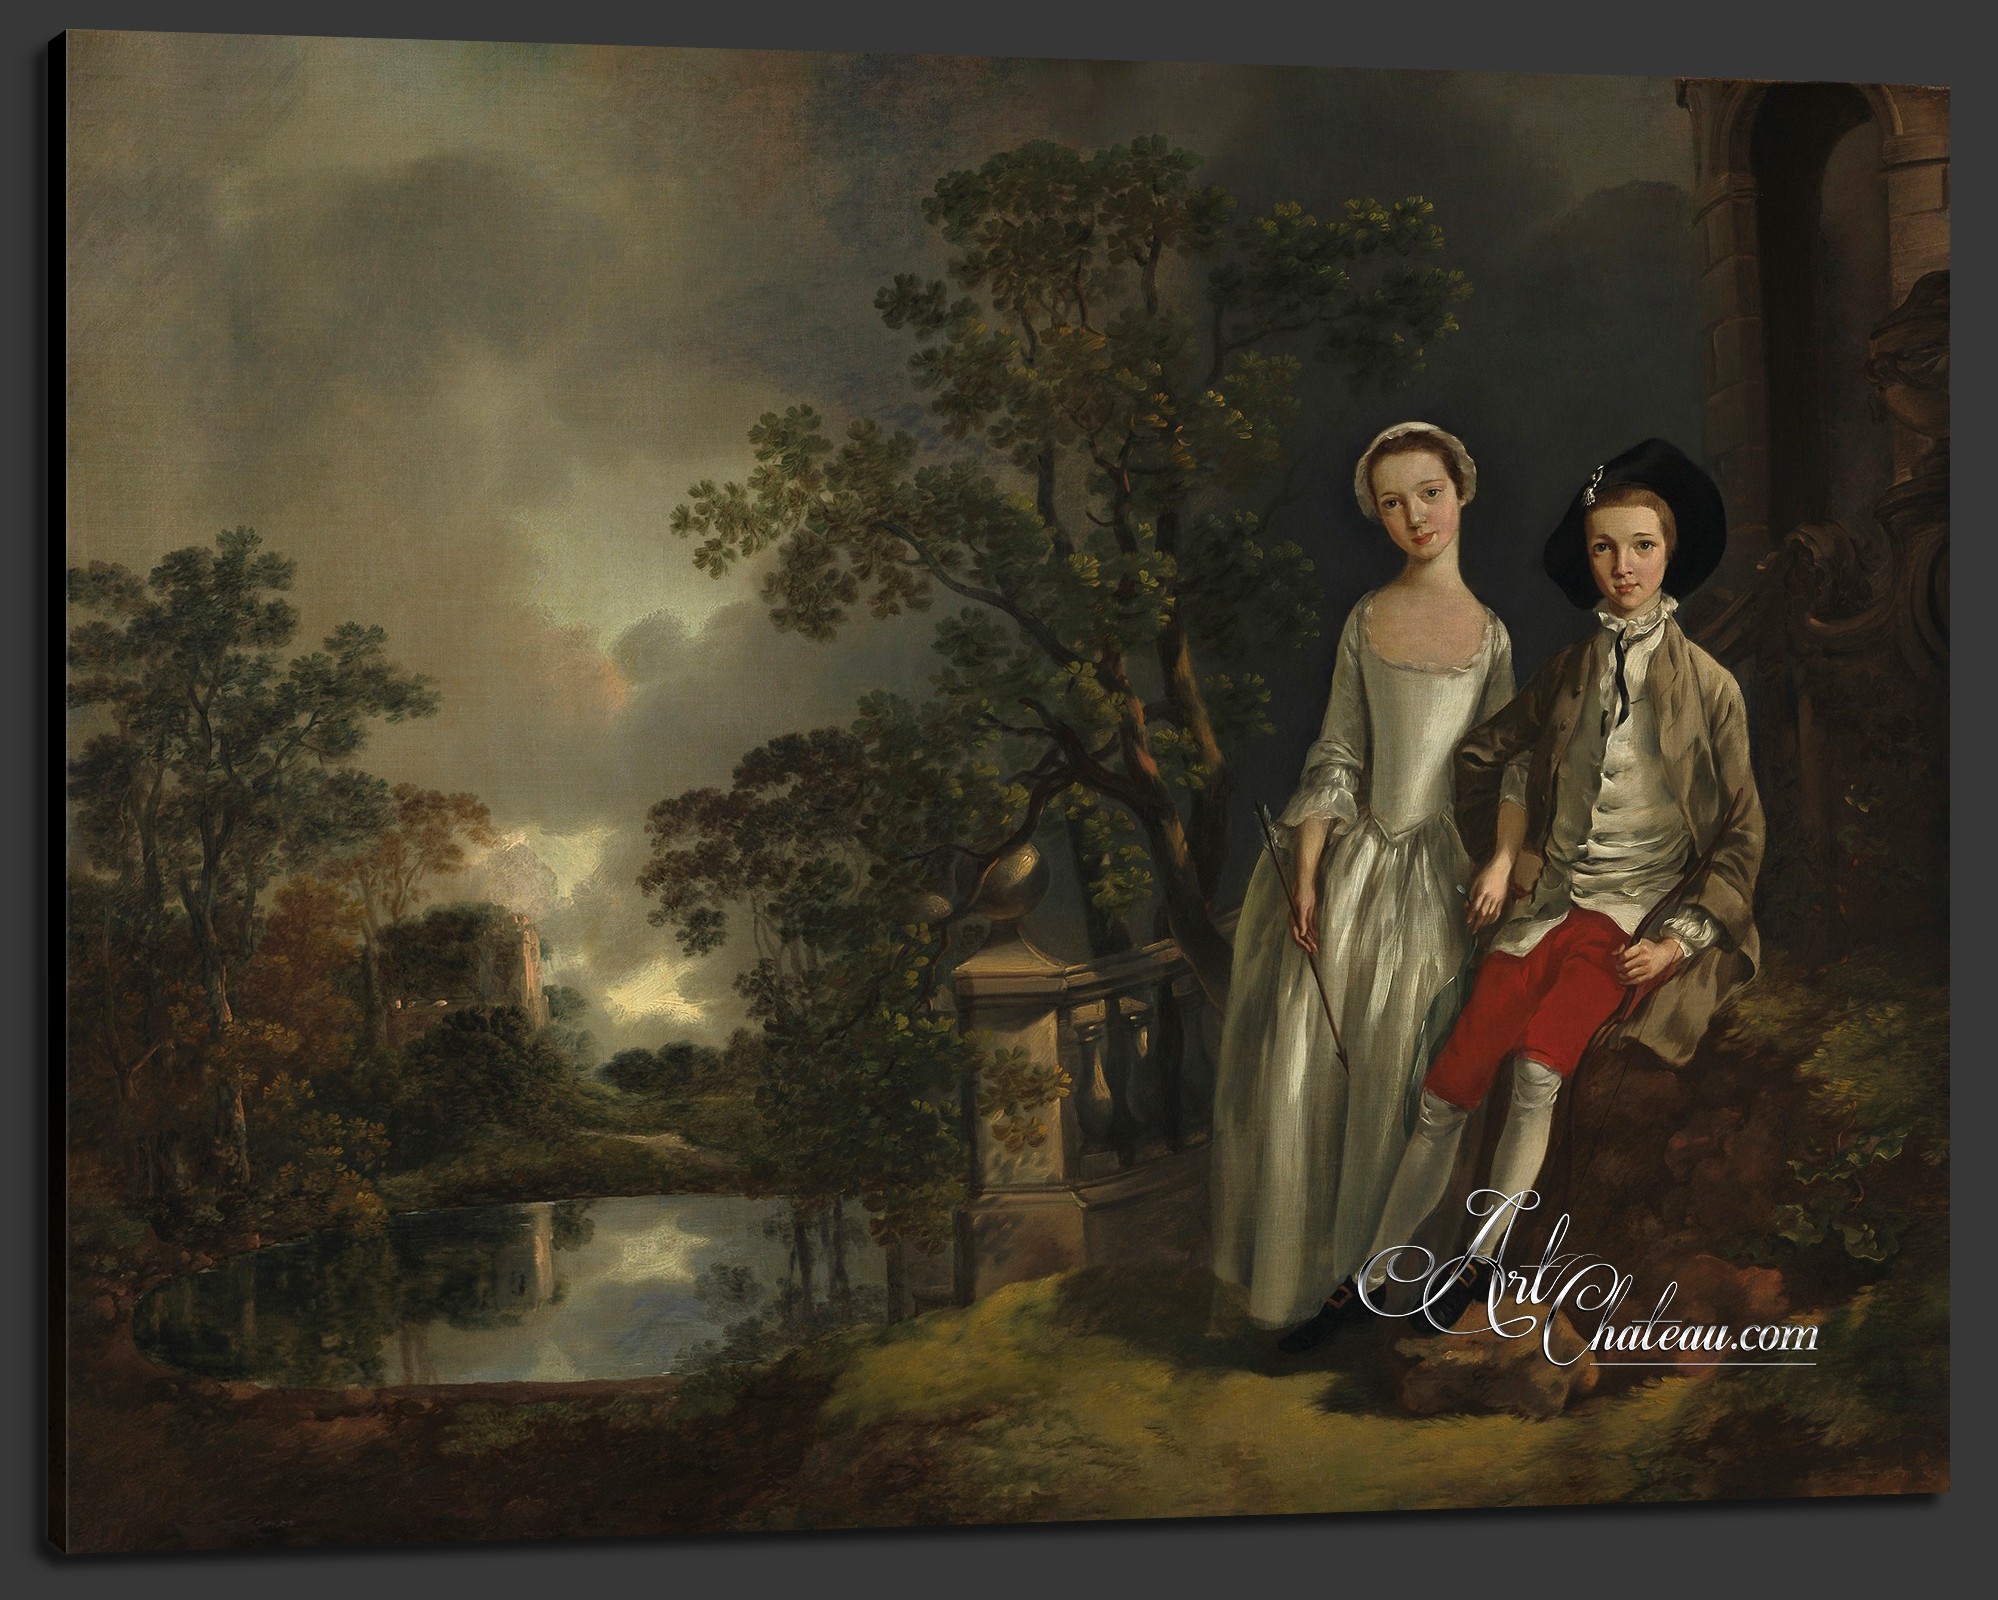 Heneage Lloyd and his sister Lucy, after Thomas Gainsborough